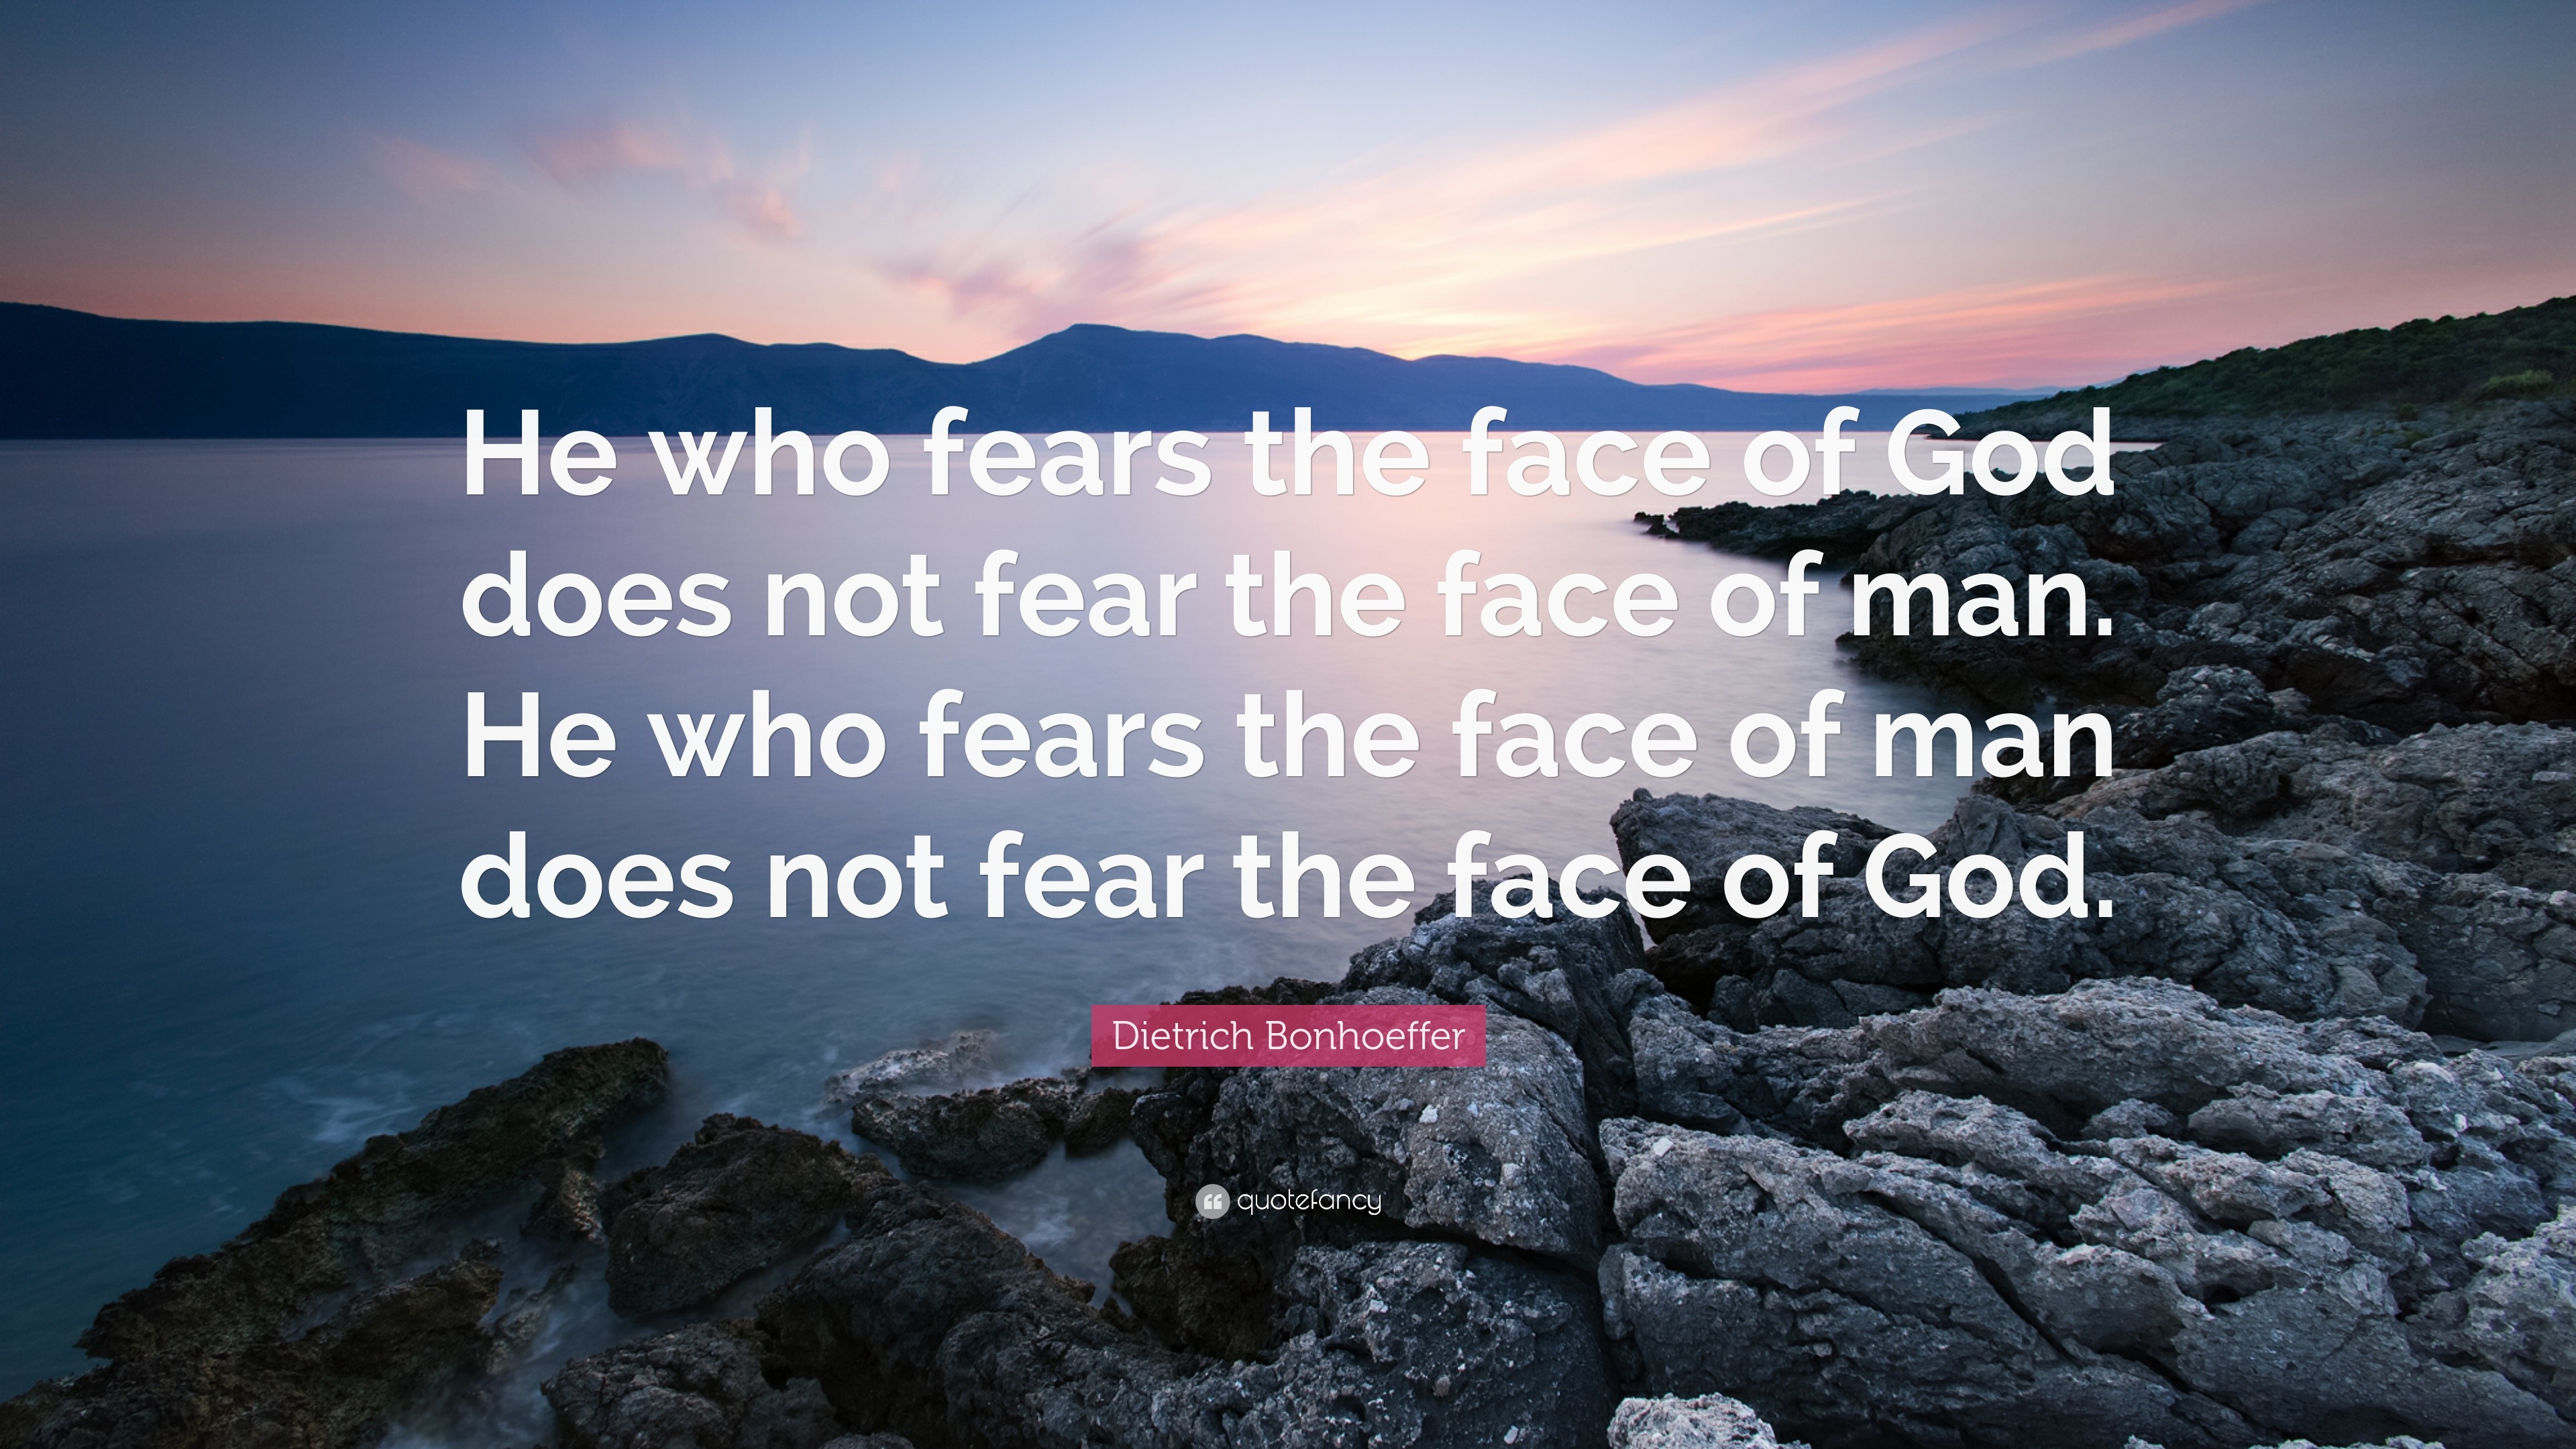 Dietrich Bonhoeffer Quote: “He Who Fears The Face Of God Does Not Fear The Face Of